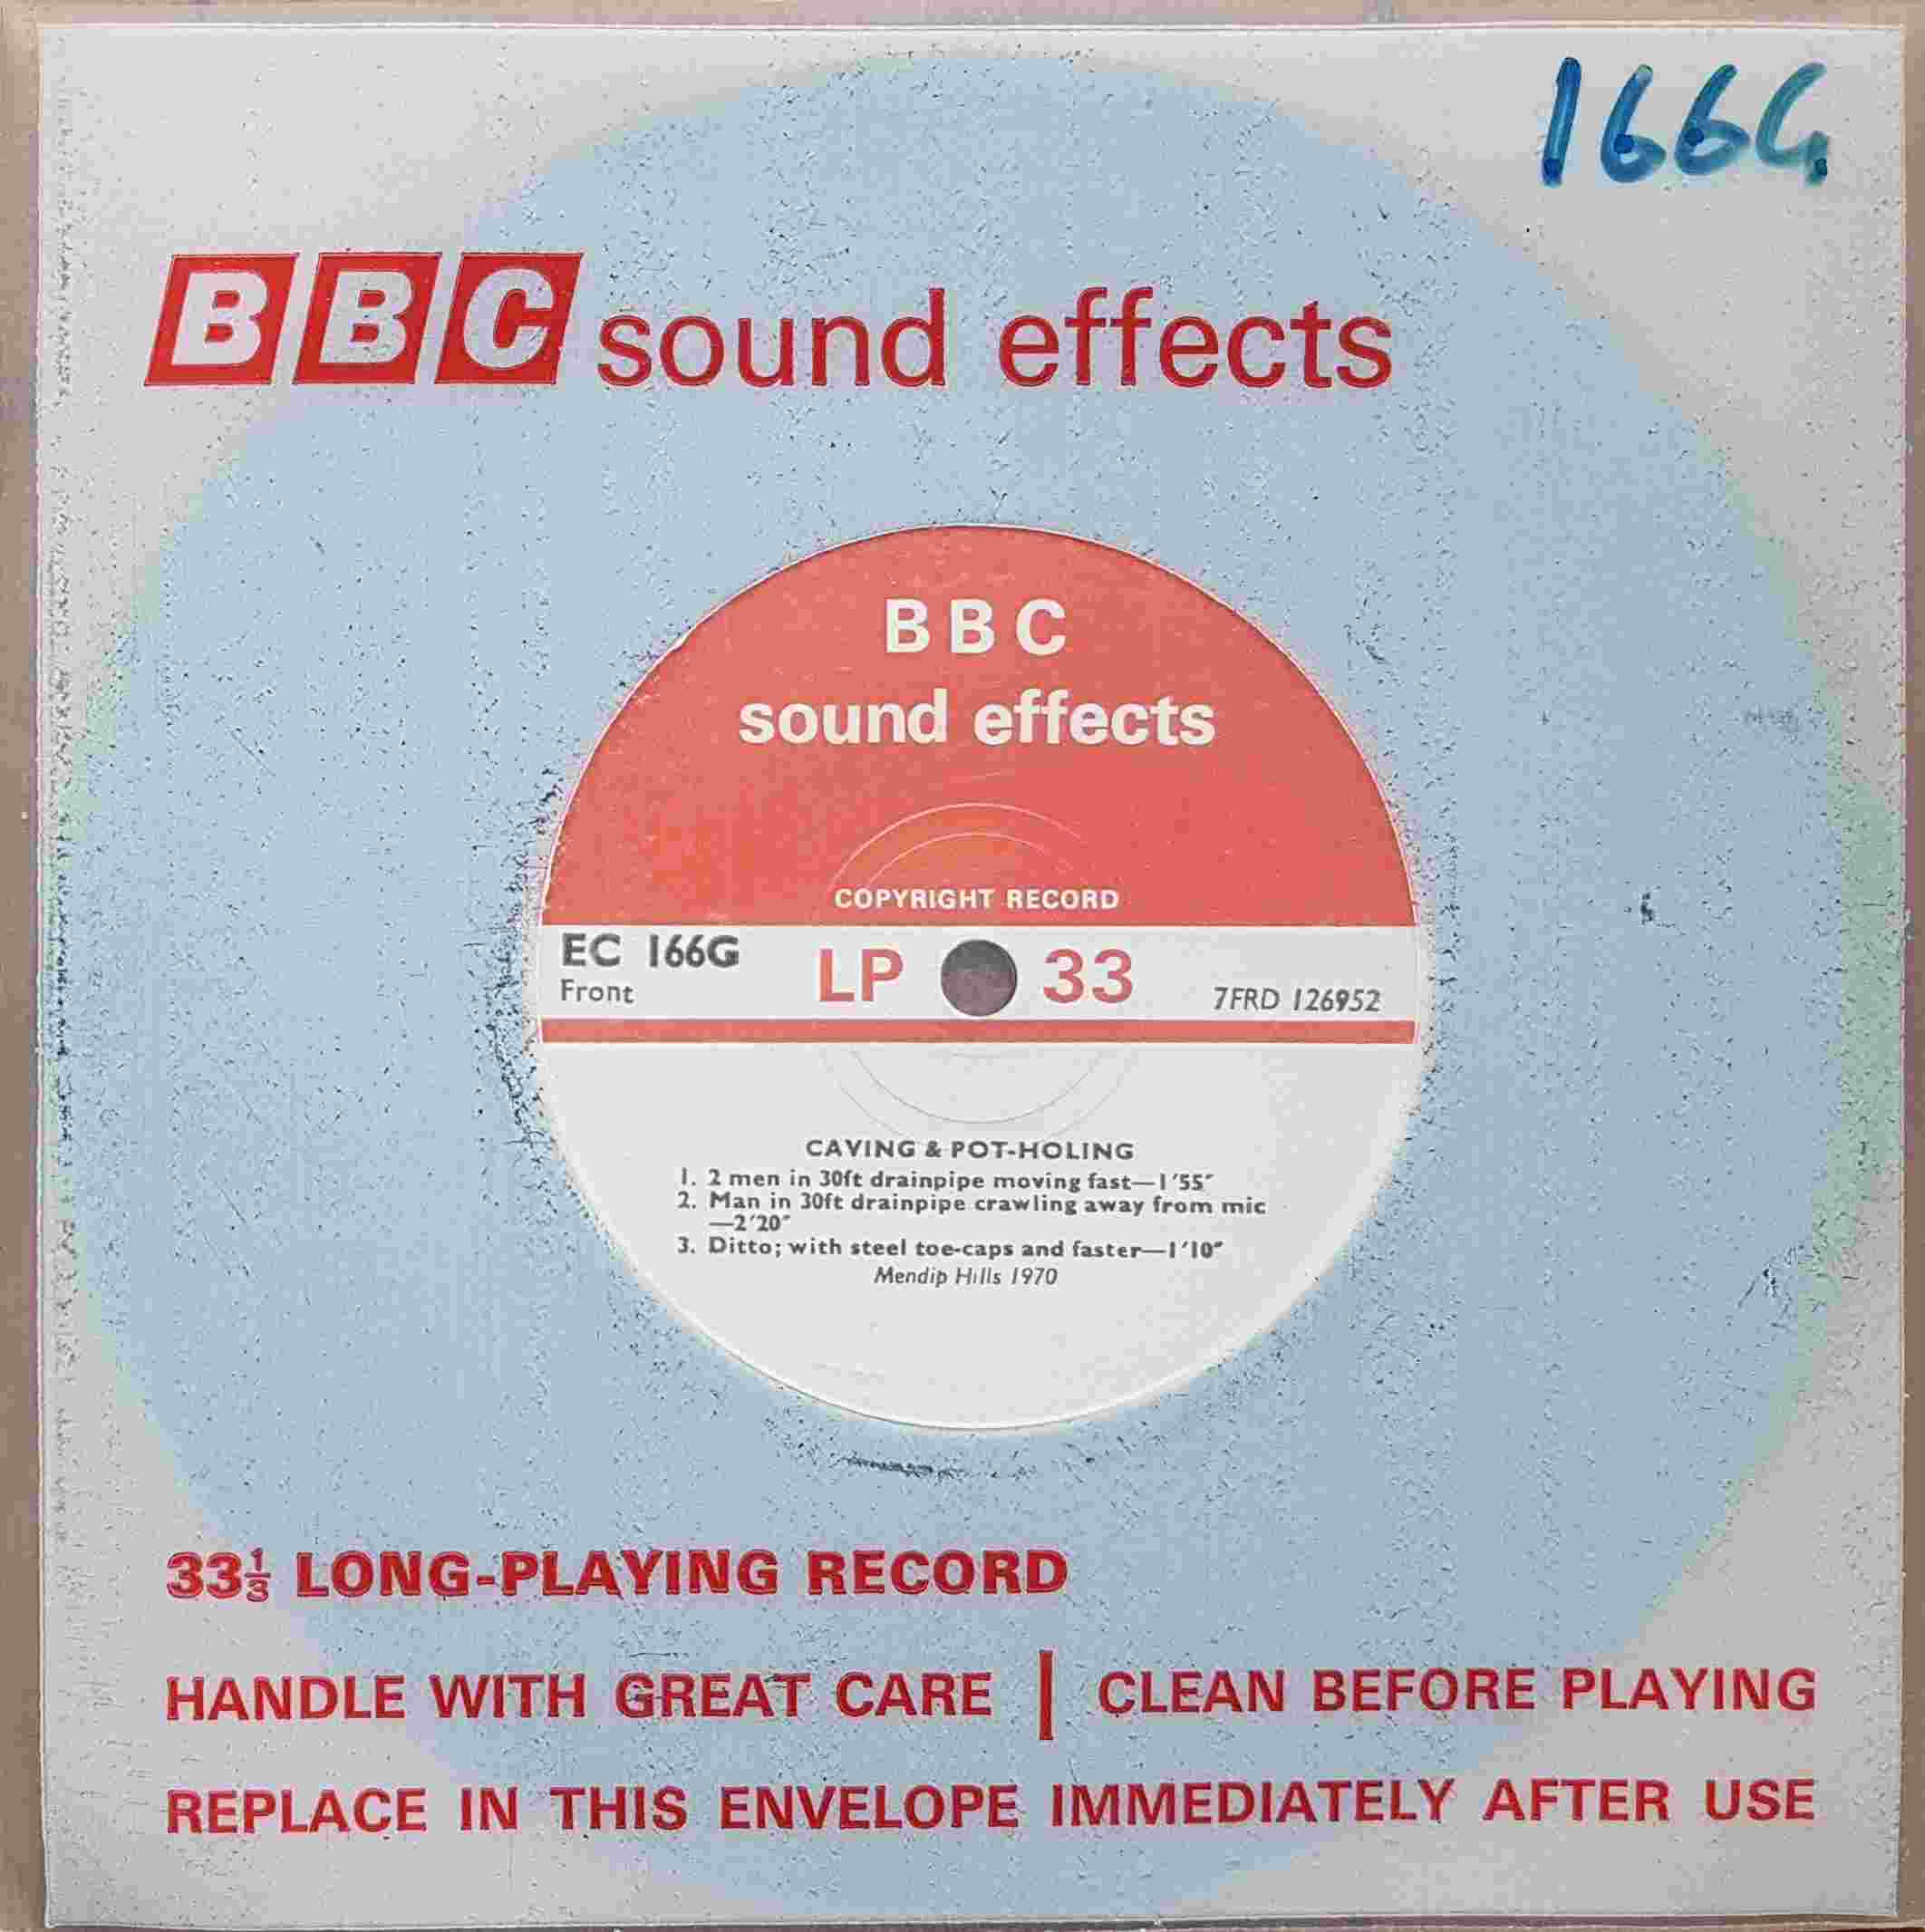 Picture of EC 166G Caving & pot-holing by artist Not registered from the BBC records and Tapes library